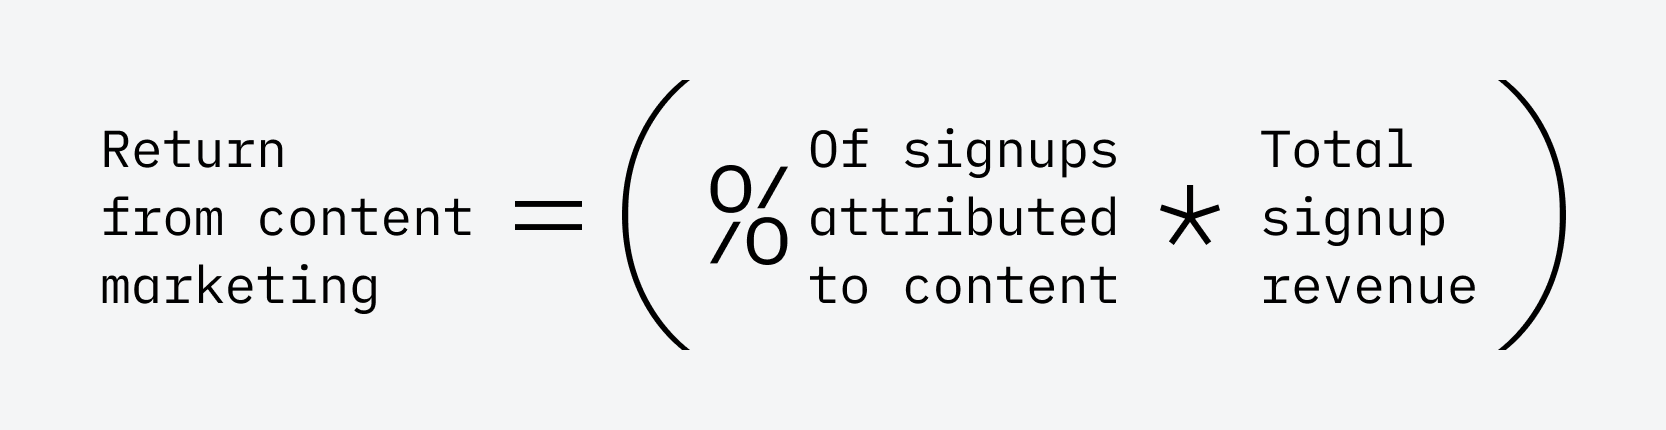 Return from content = (% of signups attributed to content * total signup revenue)